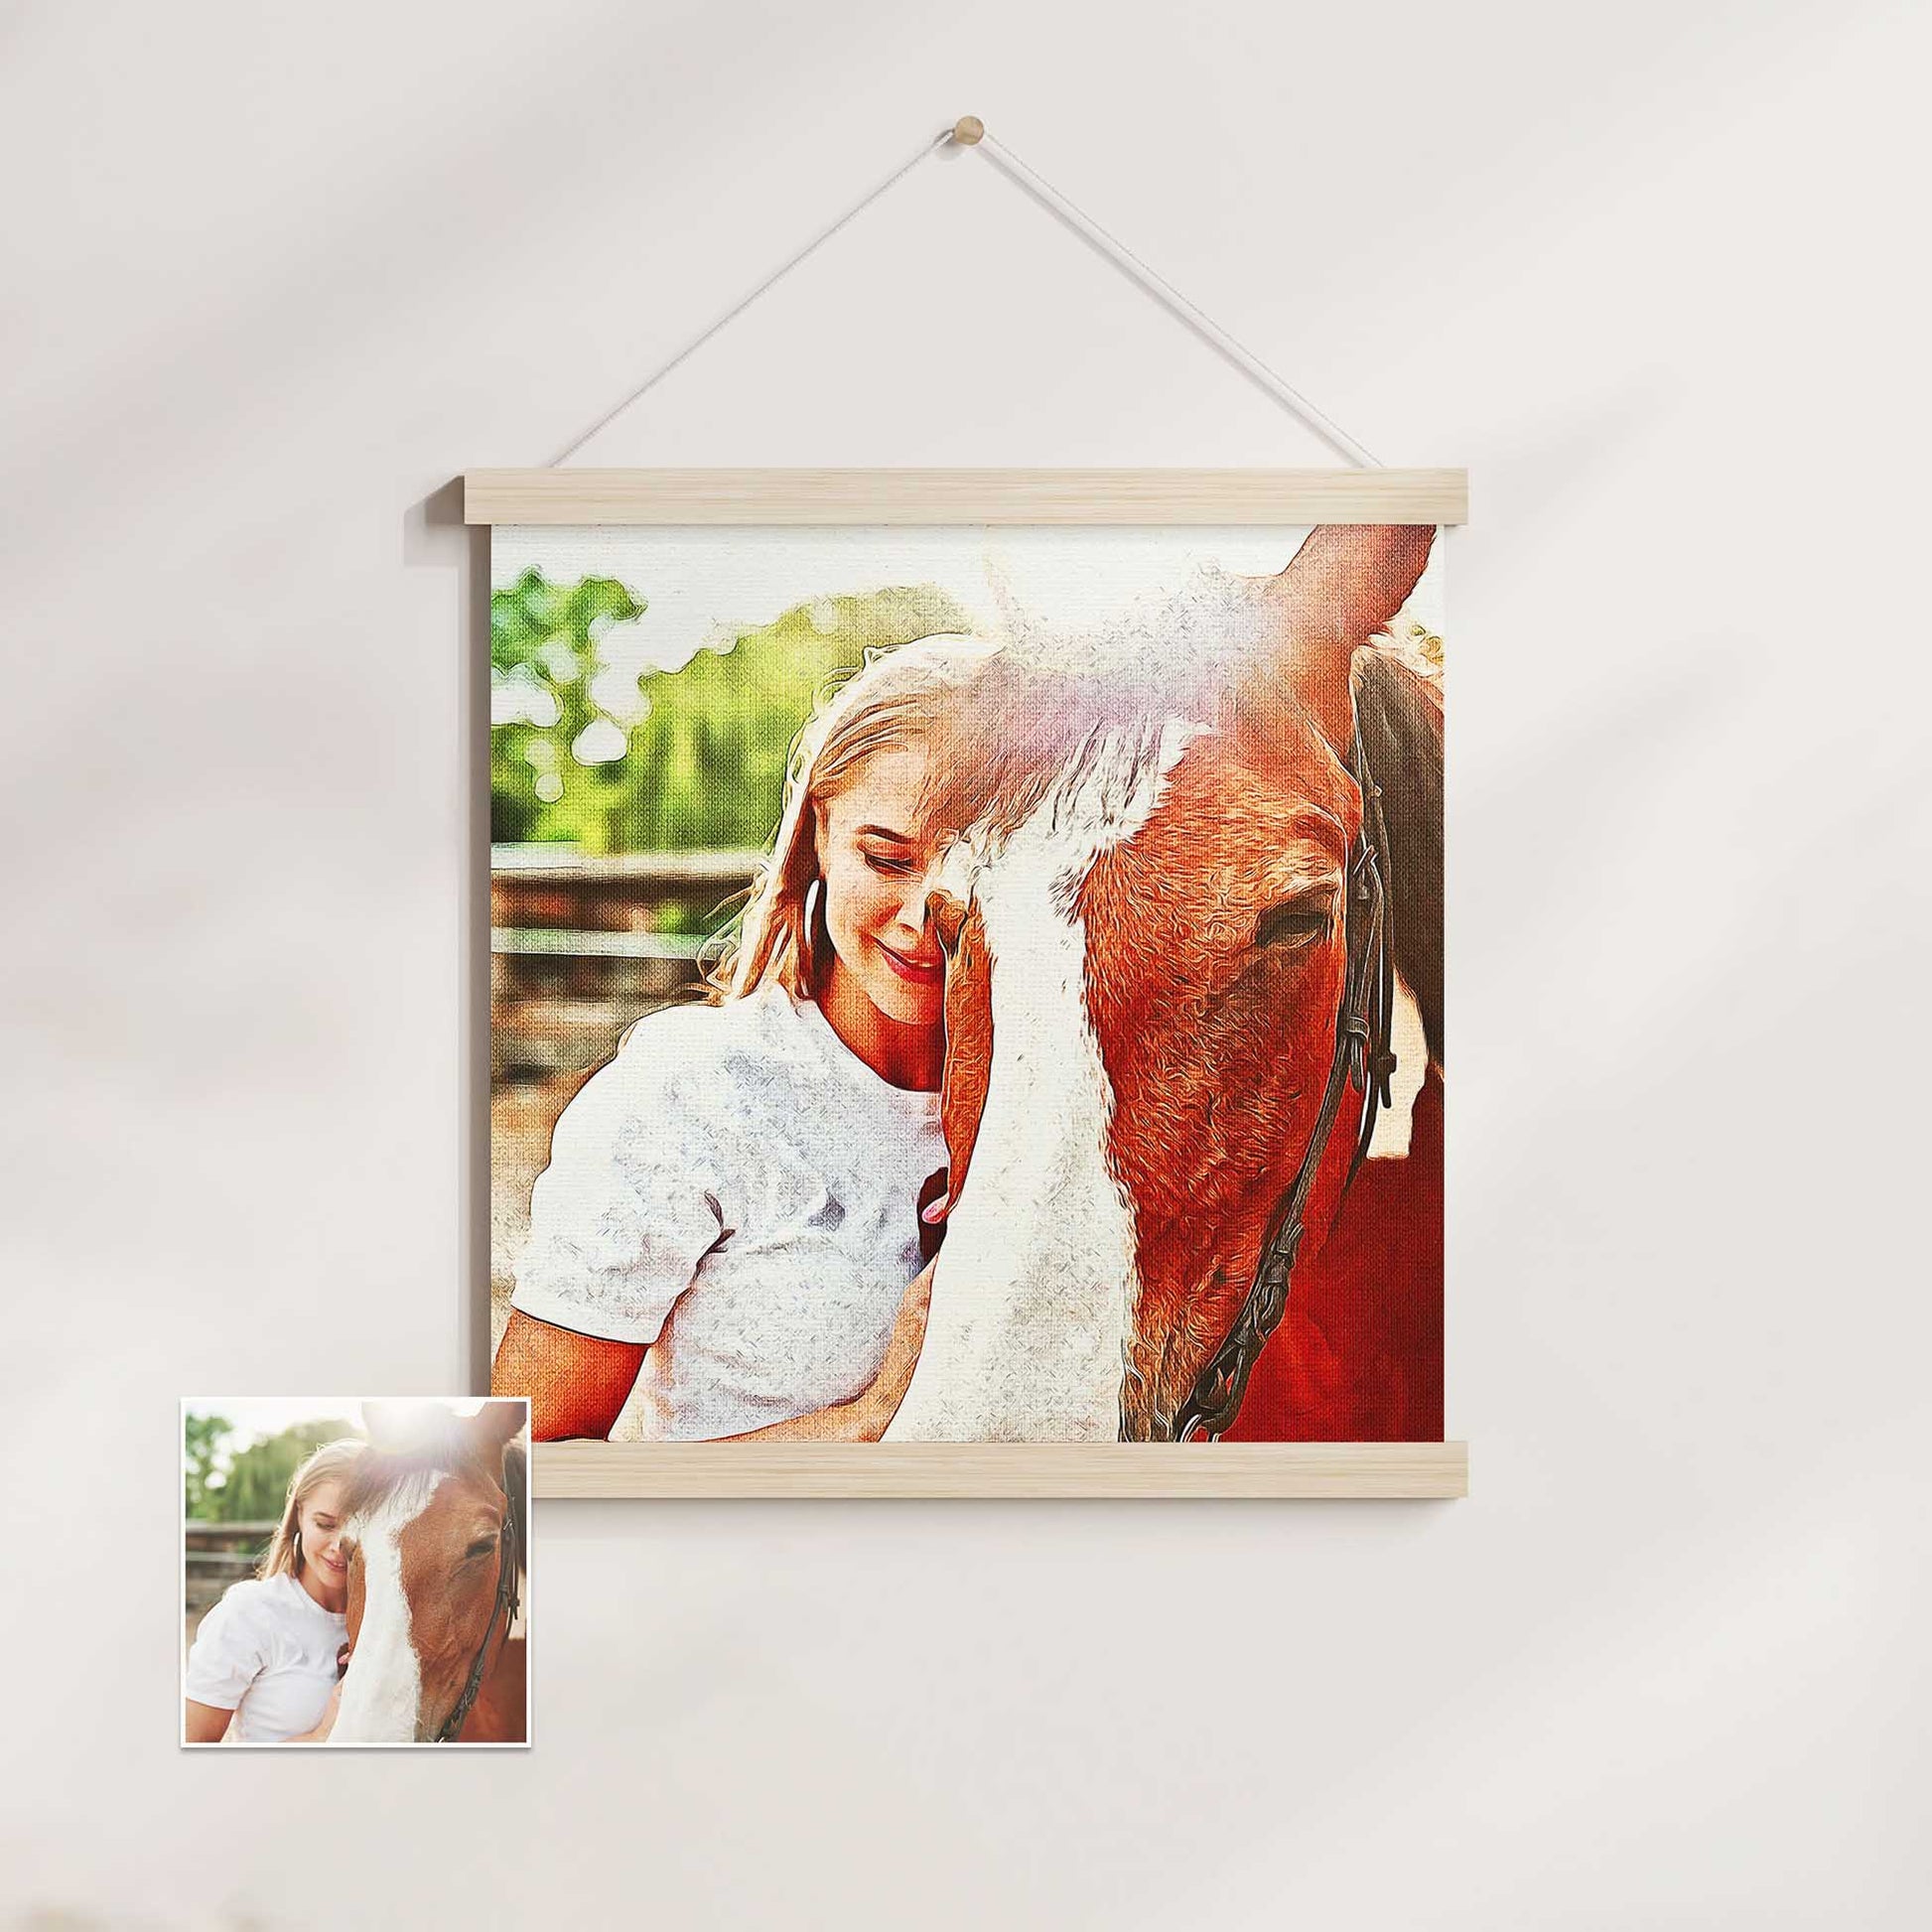 Discover the allure of the Personalised Artistic Oil Painting Poster Hanger, a perfect blend of traditional craftsmanship and modern design. This classic oil painting, created from your cherished photo, showcases an authentic style 